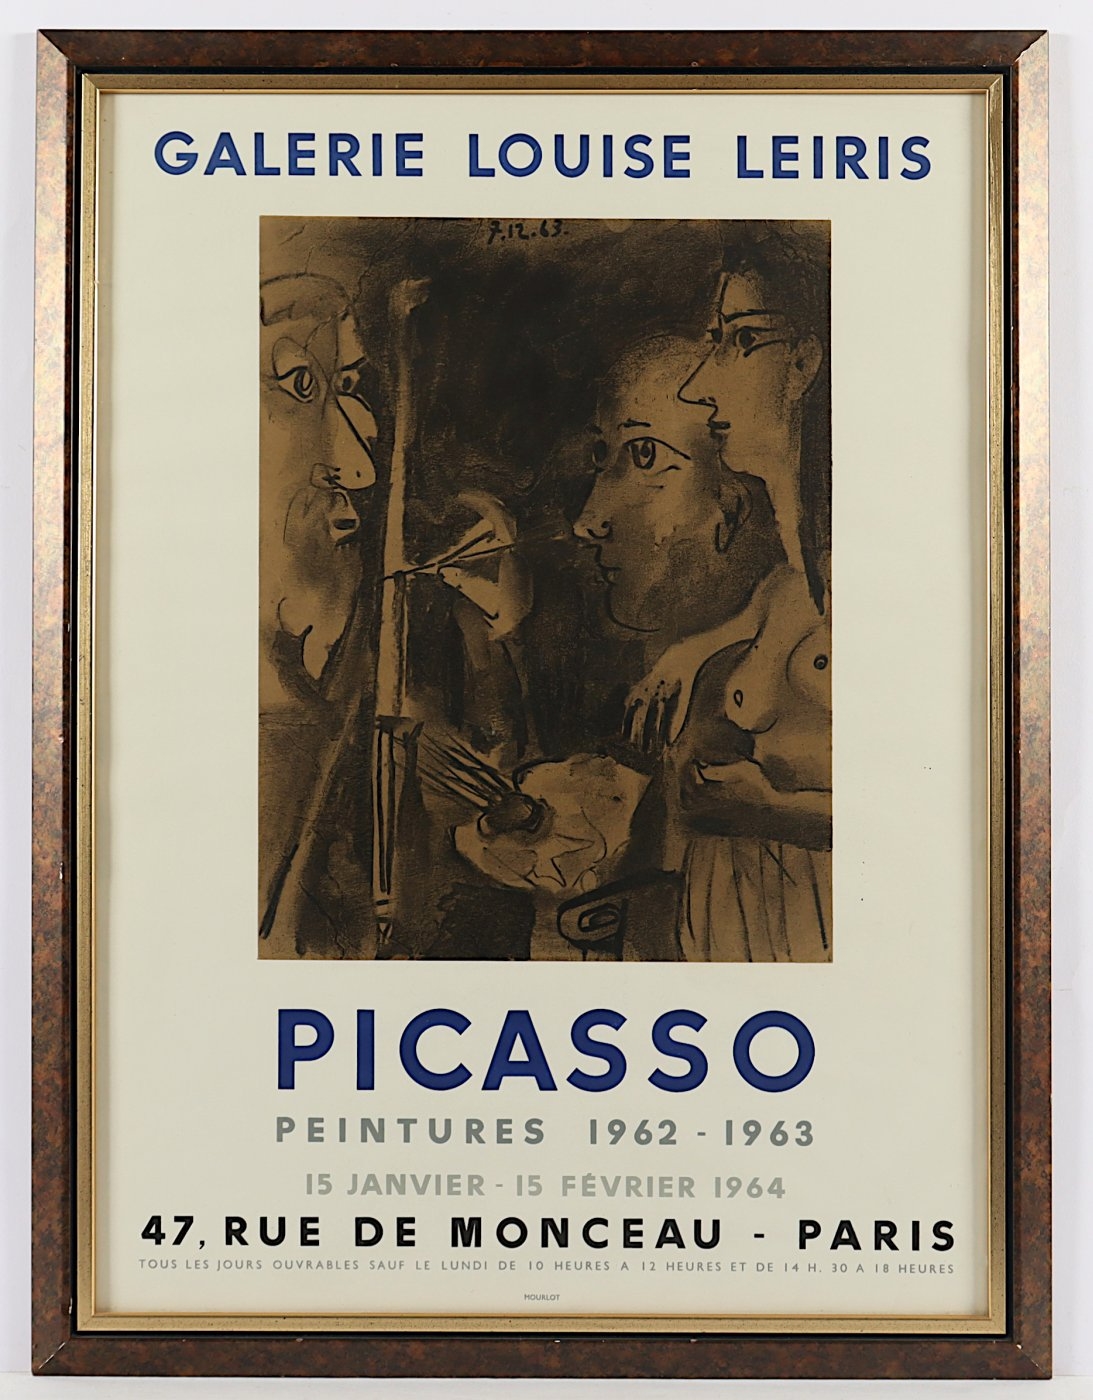 Plakat by Pablo Picasso, 1964